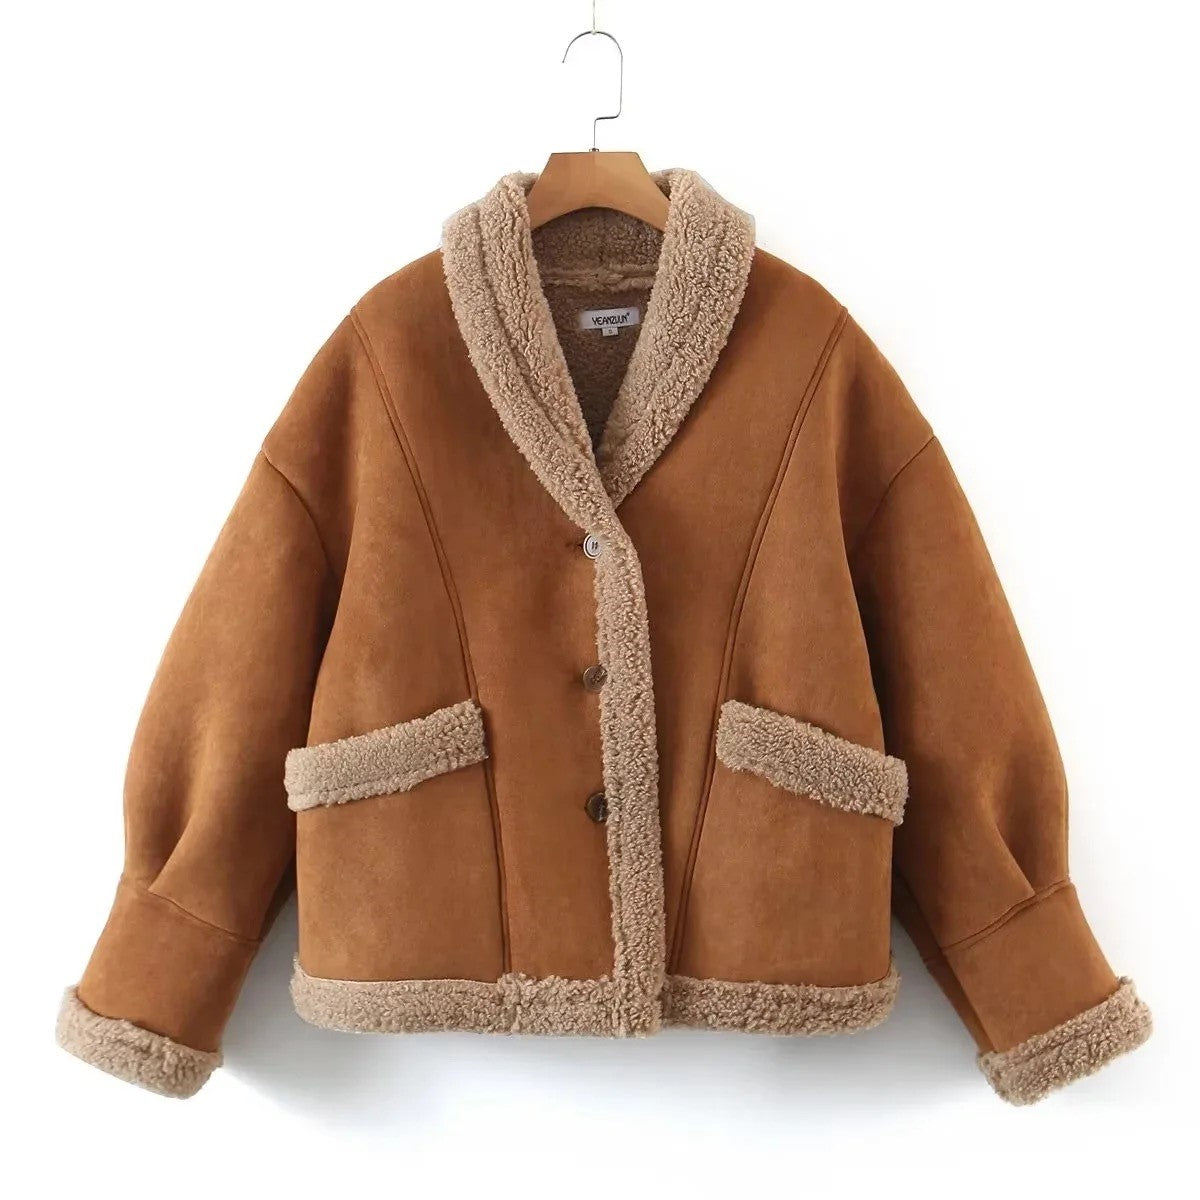 Oversized Woolly Flying Jacket in Brown